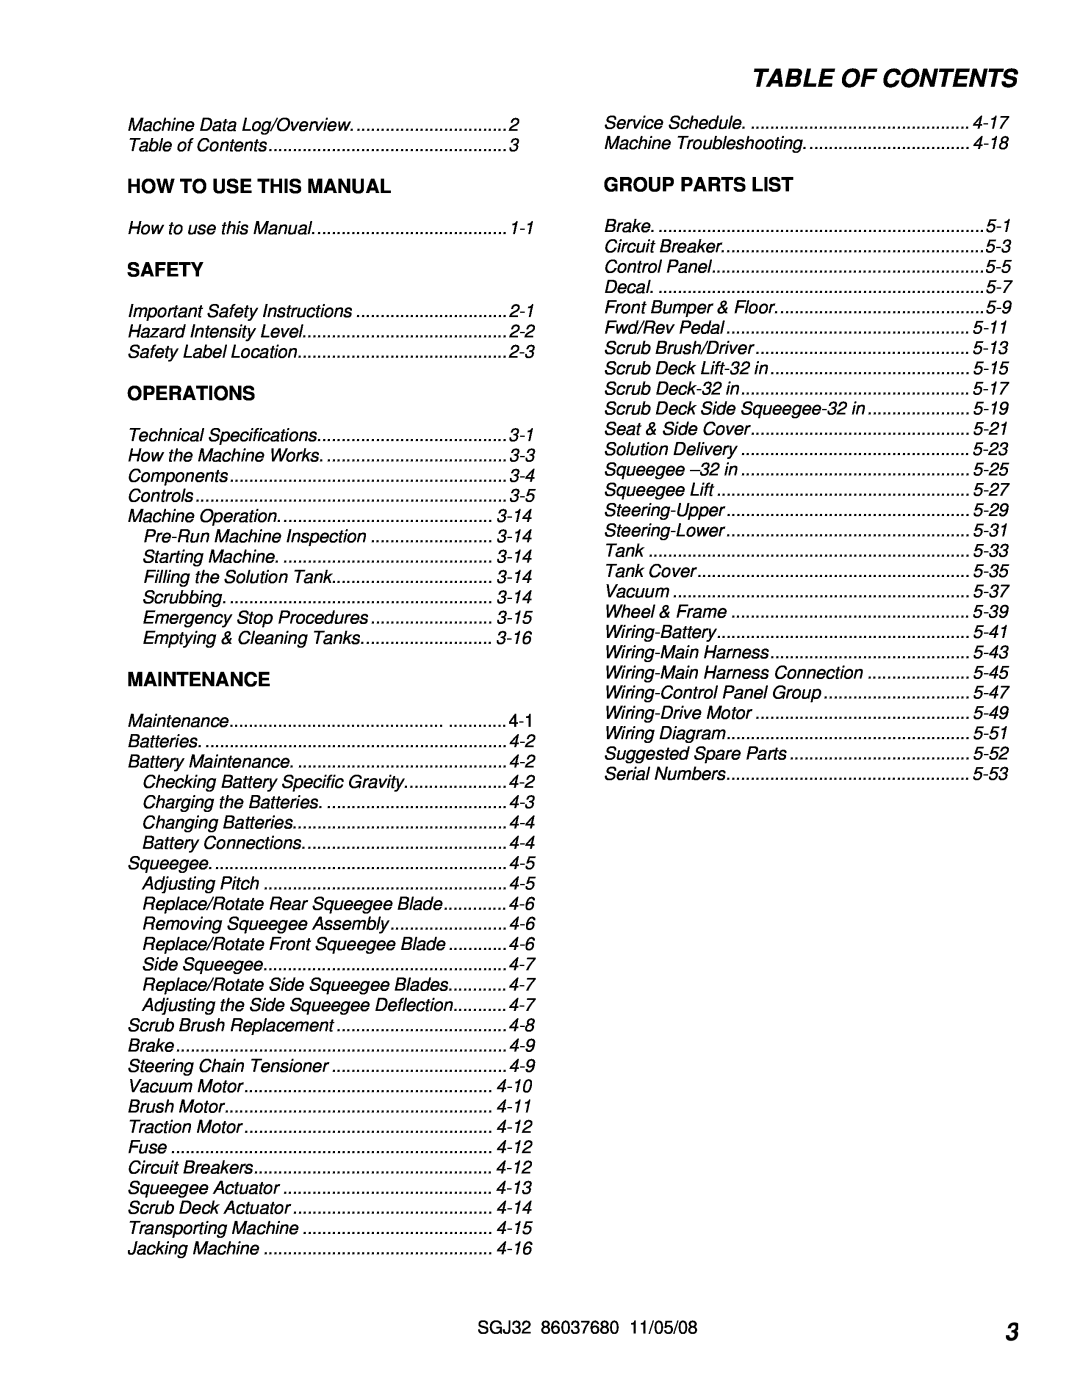 Windsor 10052530, SGJ32 Table Of Contents, How To Use This Manual, Safety, Operations, Maintenance, Group Parts List 